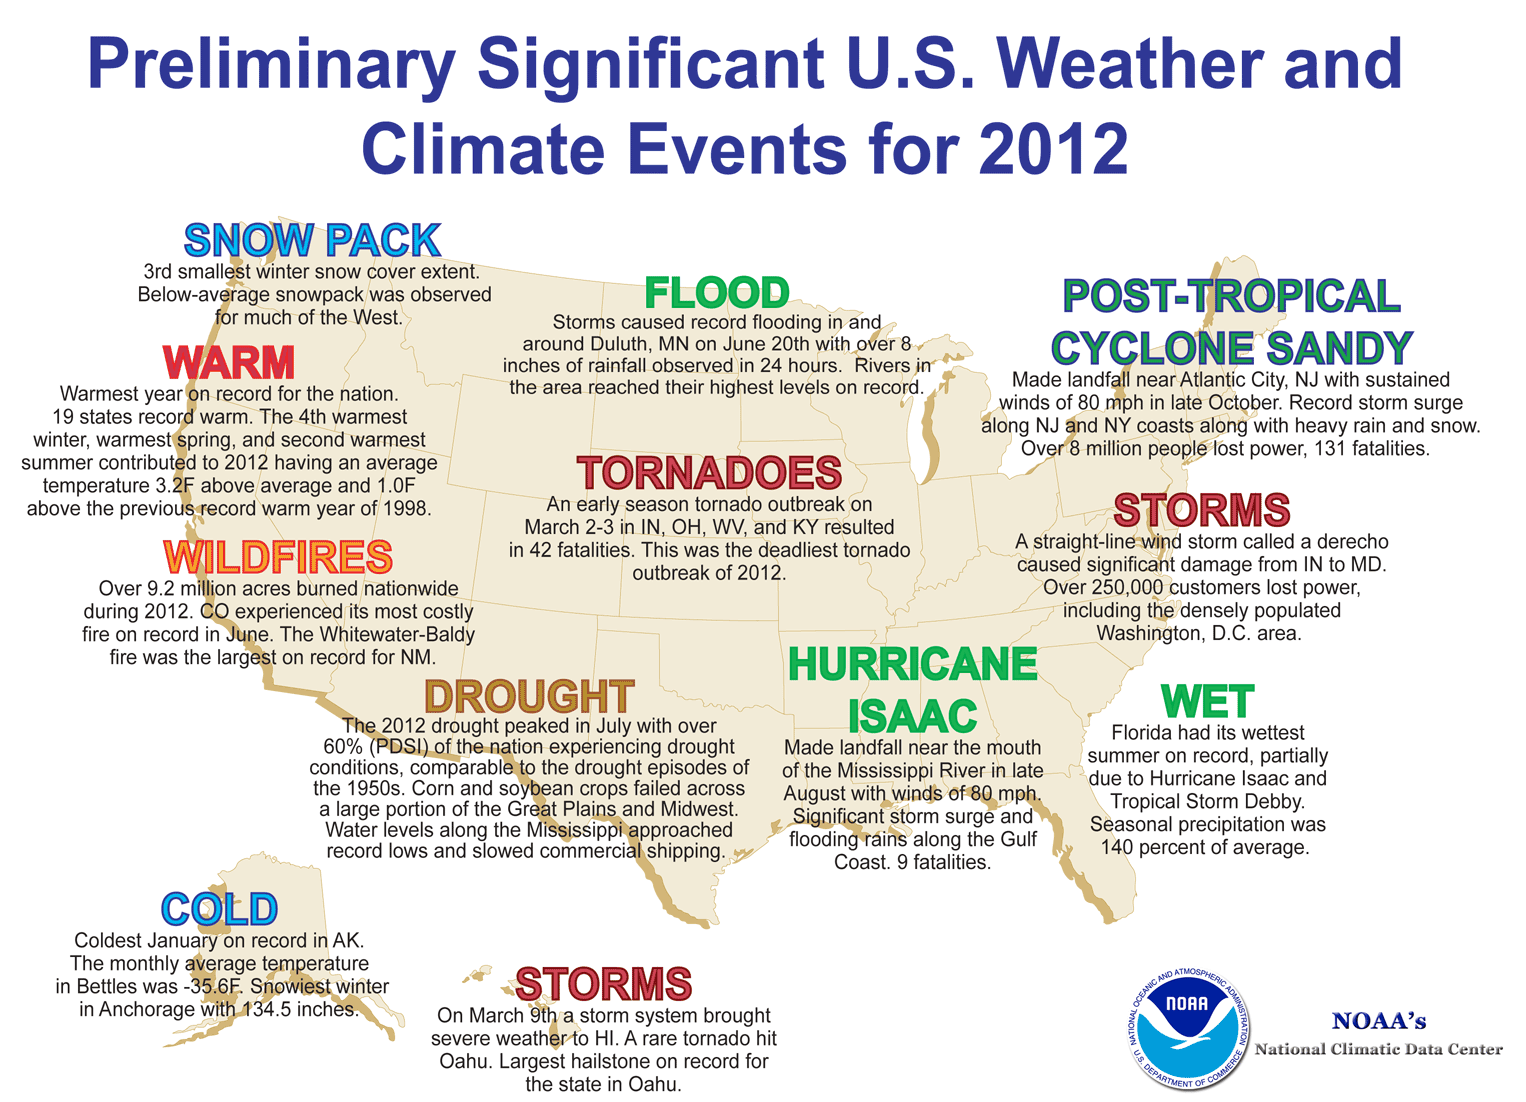 Preliminary-Significant-Weather-and-Climate-events-US-2012